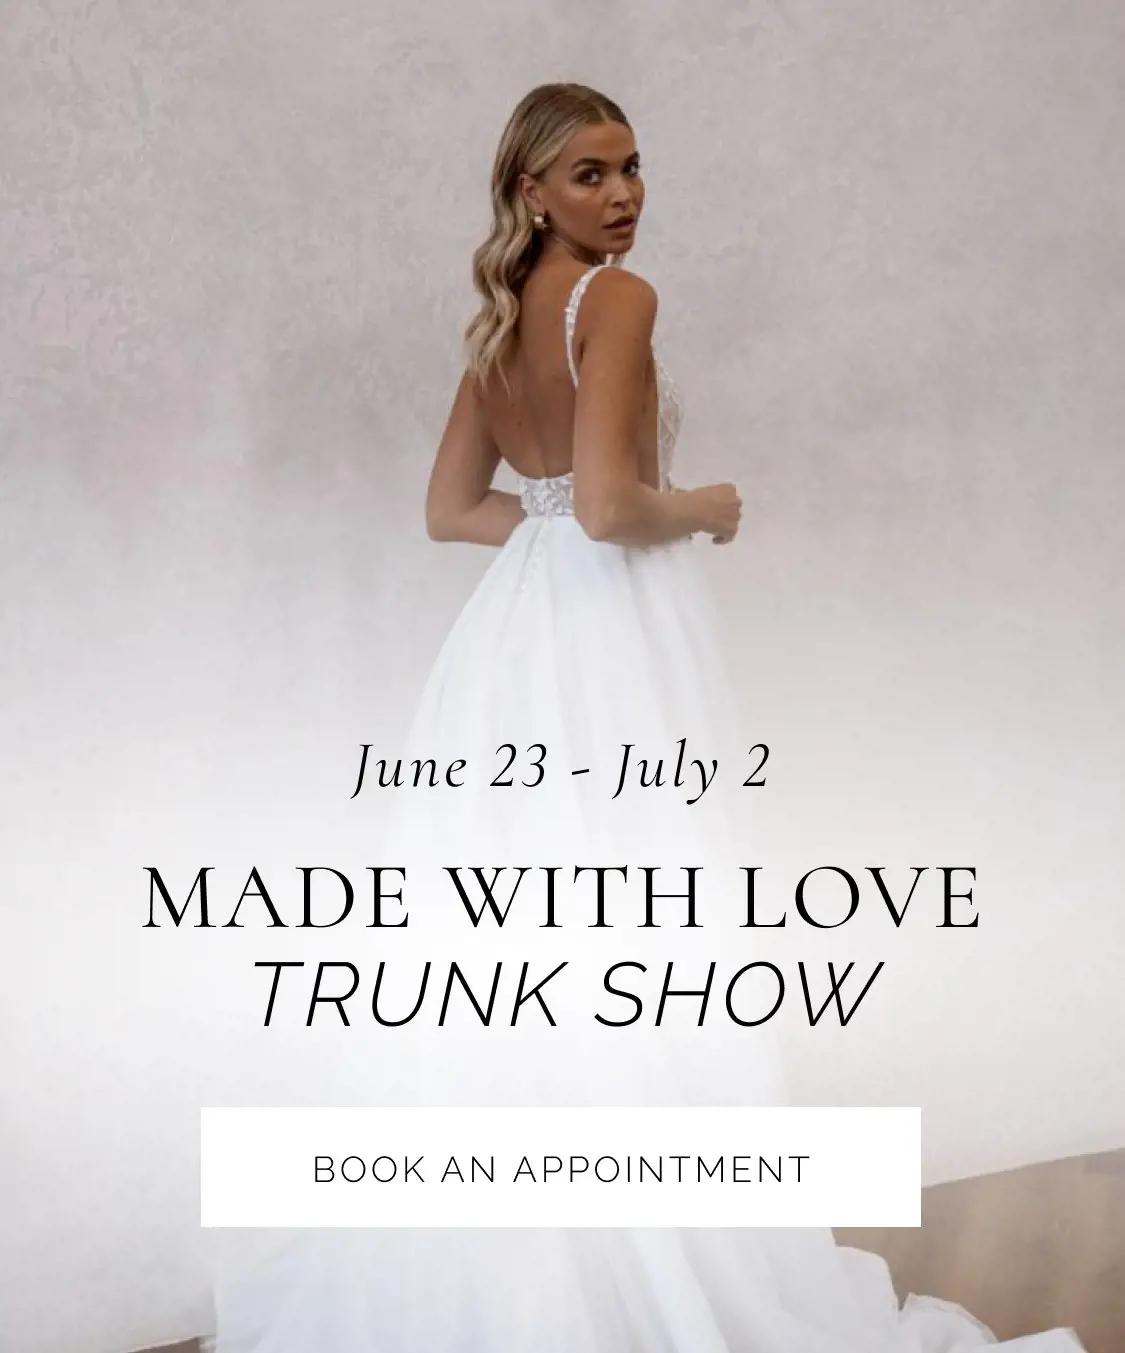 "Made With Love Trunk Show" banner for mobile